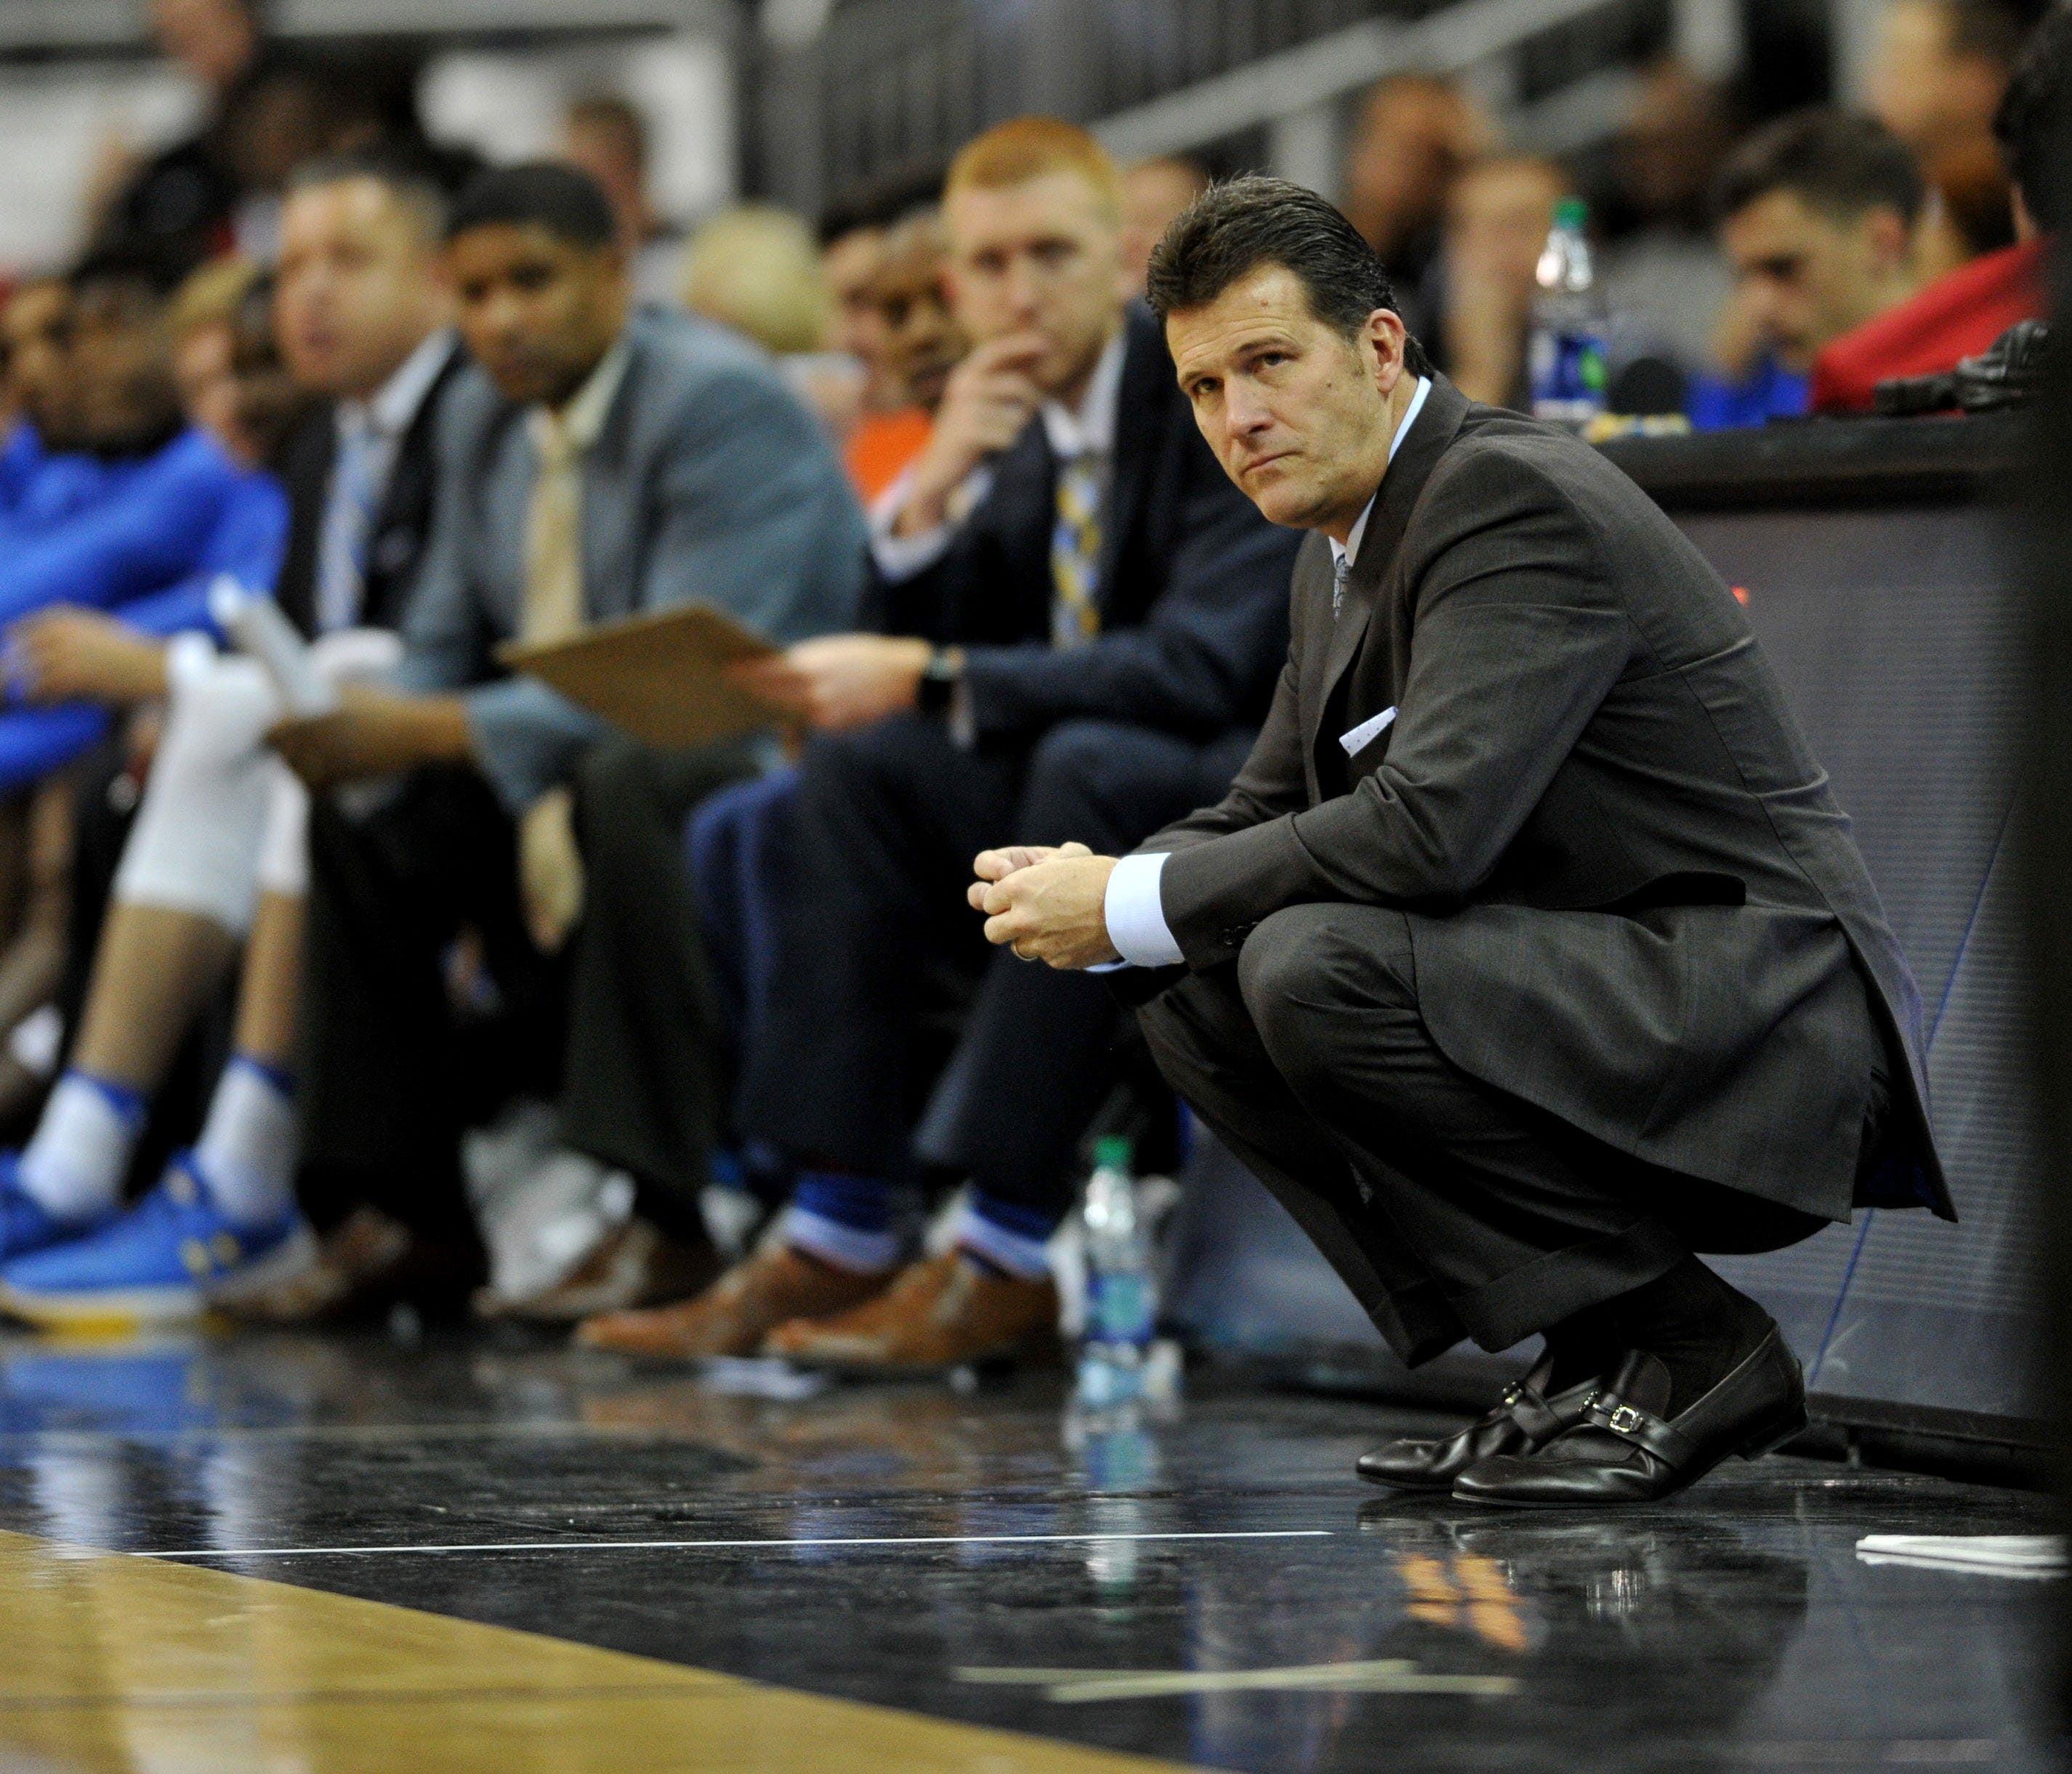 Nov 21, 2017; Kansas City, MO, USA; UCLA Bruins head coach Steve Alford watches play during the second half against the Wisconsin Badgers at Sprint Center. Mandatory Credit: Denny Medley-USA TODAY Sports ORG XMIT: USATSI-377297 ORIG FILE ID:  2017112